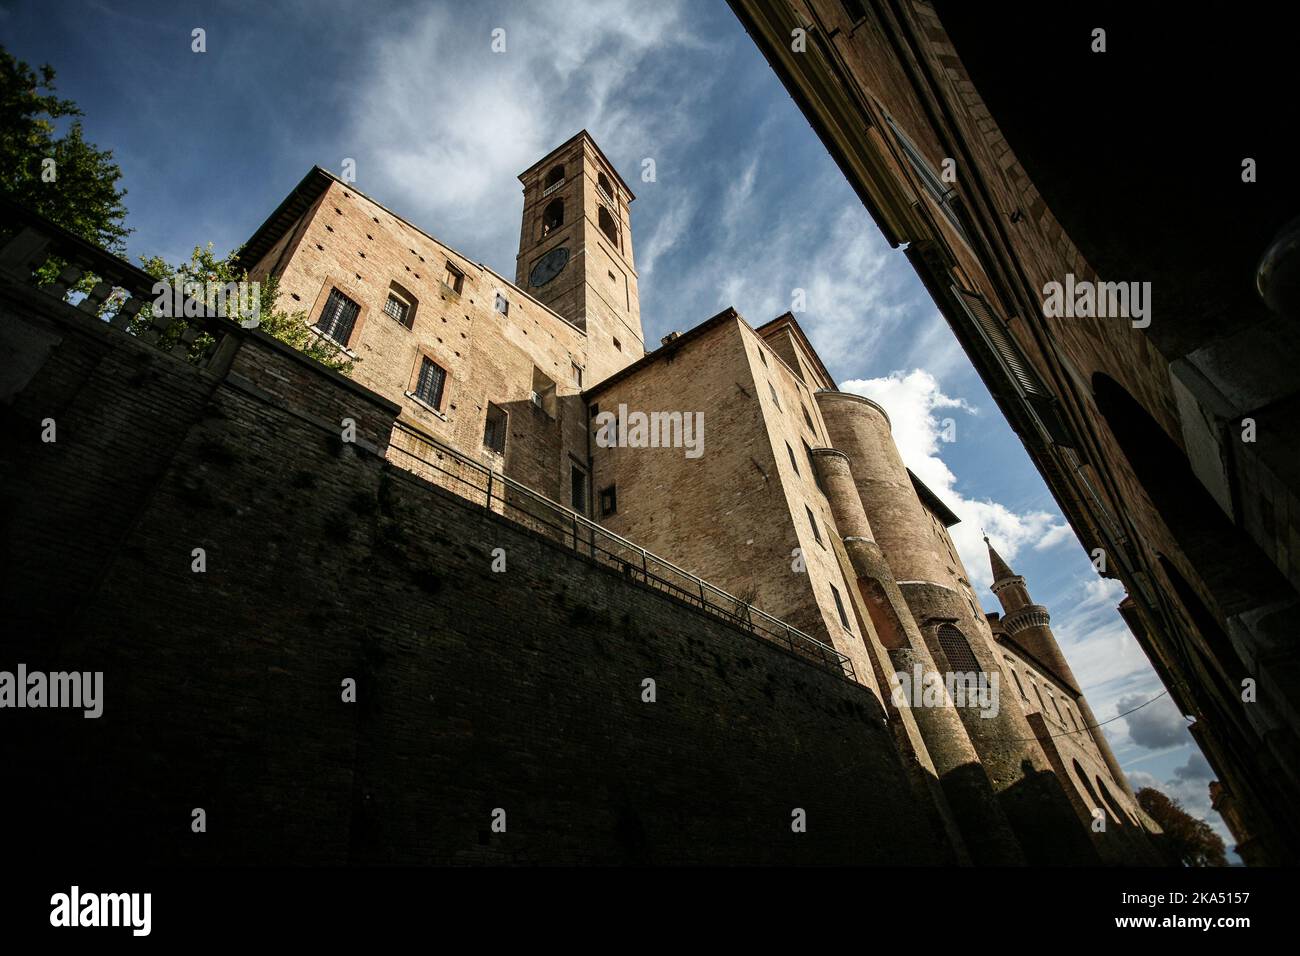 Urbino - a walled city and World Heritage Site in Italy Stock Photo